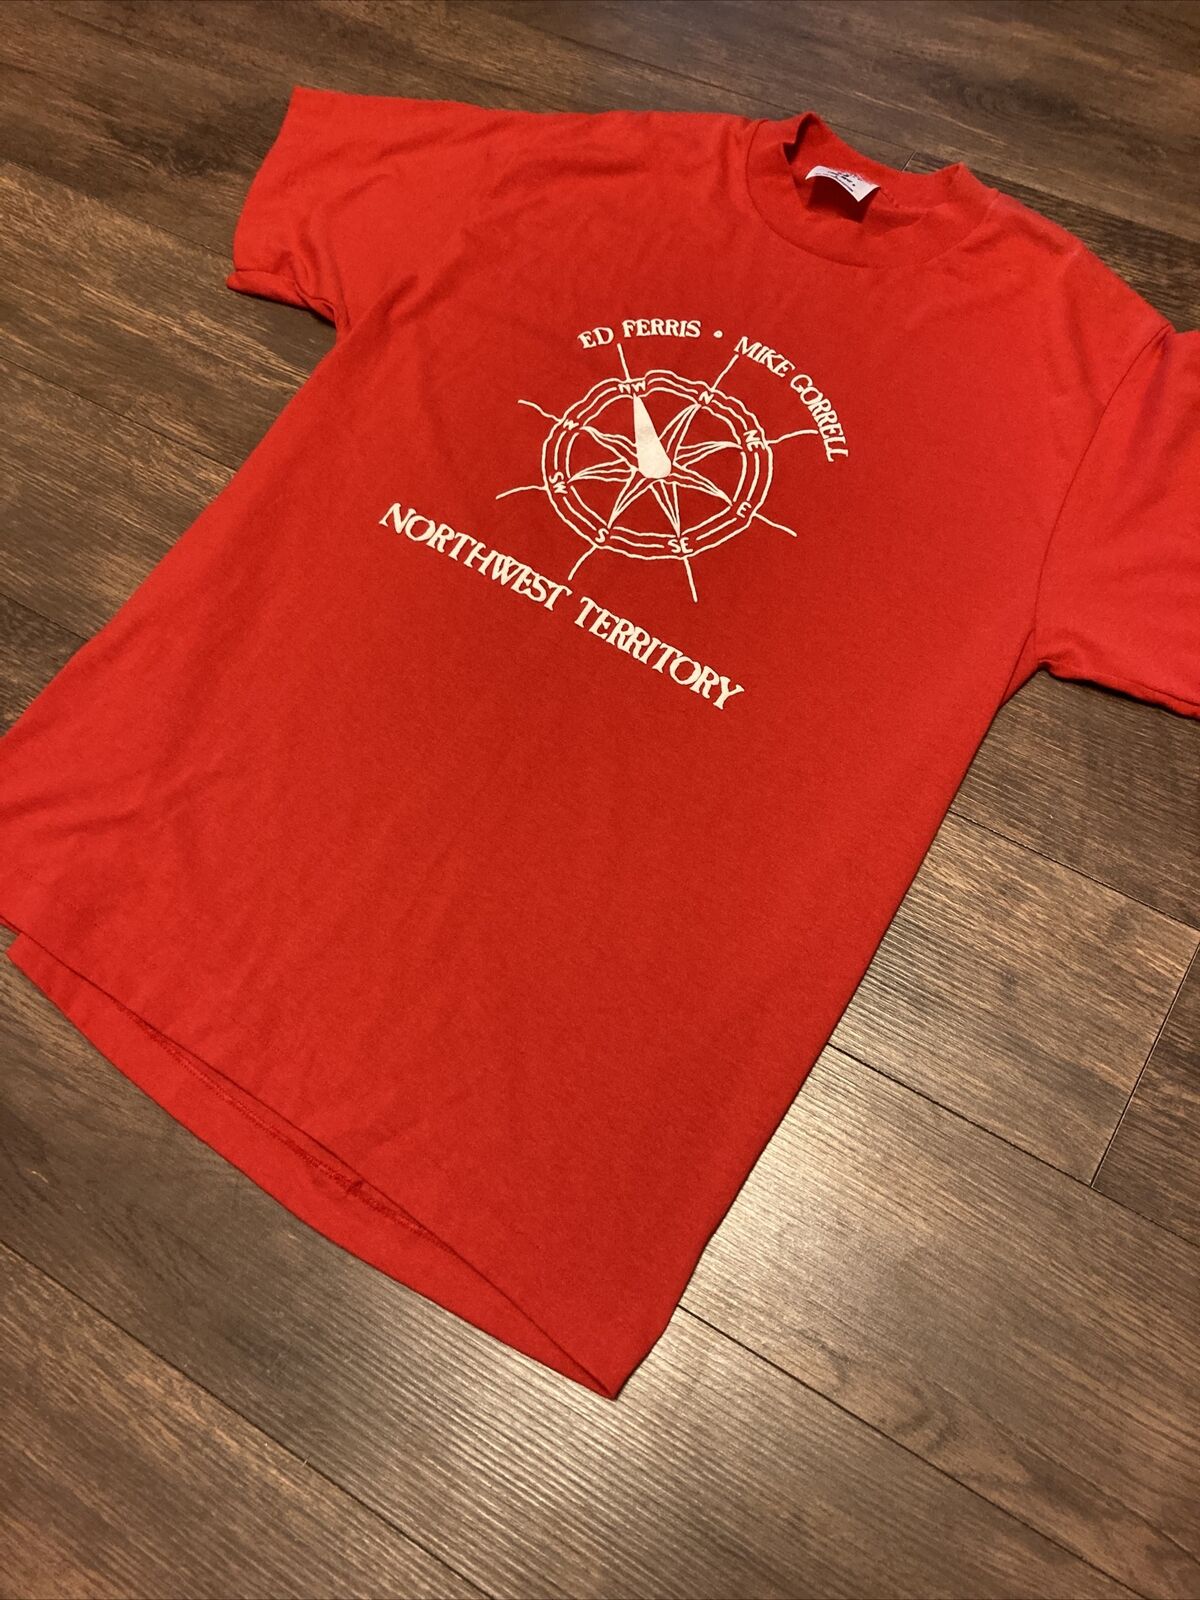 Ed Ferris Mike Gorrell And The Northwest Territory Vtg Red Bluegrass Shirt Large